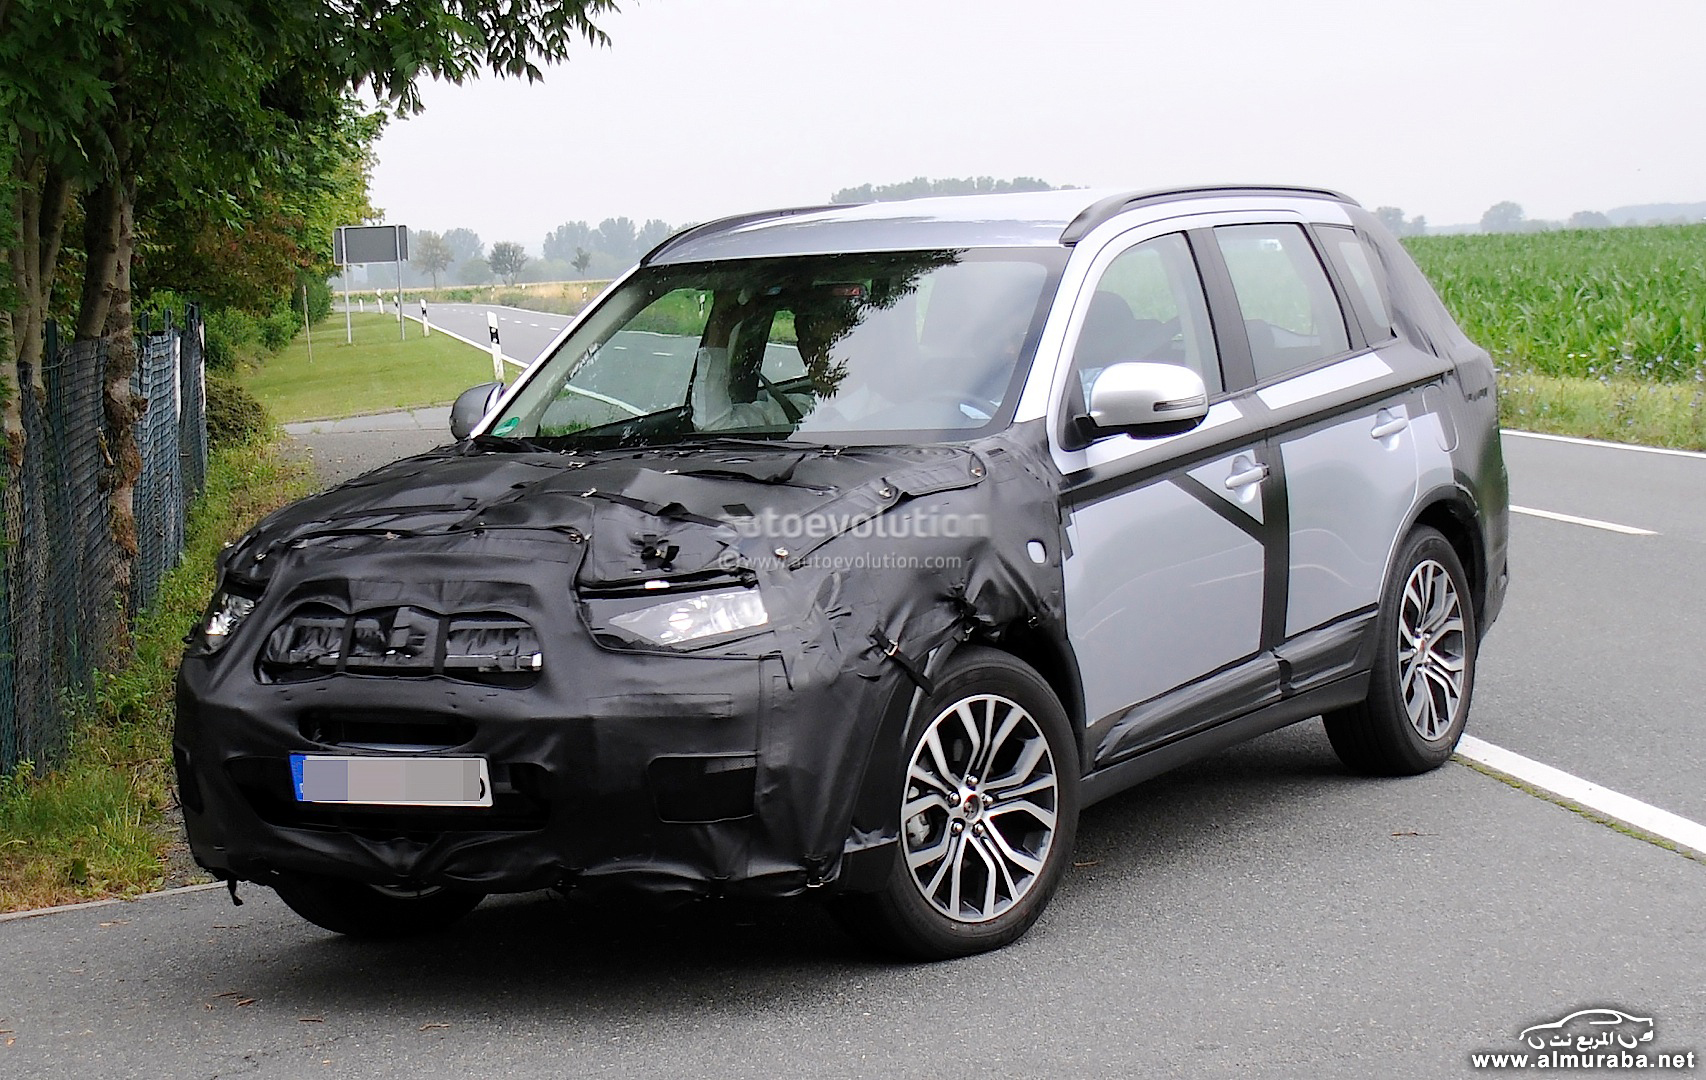 2015-mitsubishi-outlander-spied-again-this-time-in-europe-photo-gallery_2